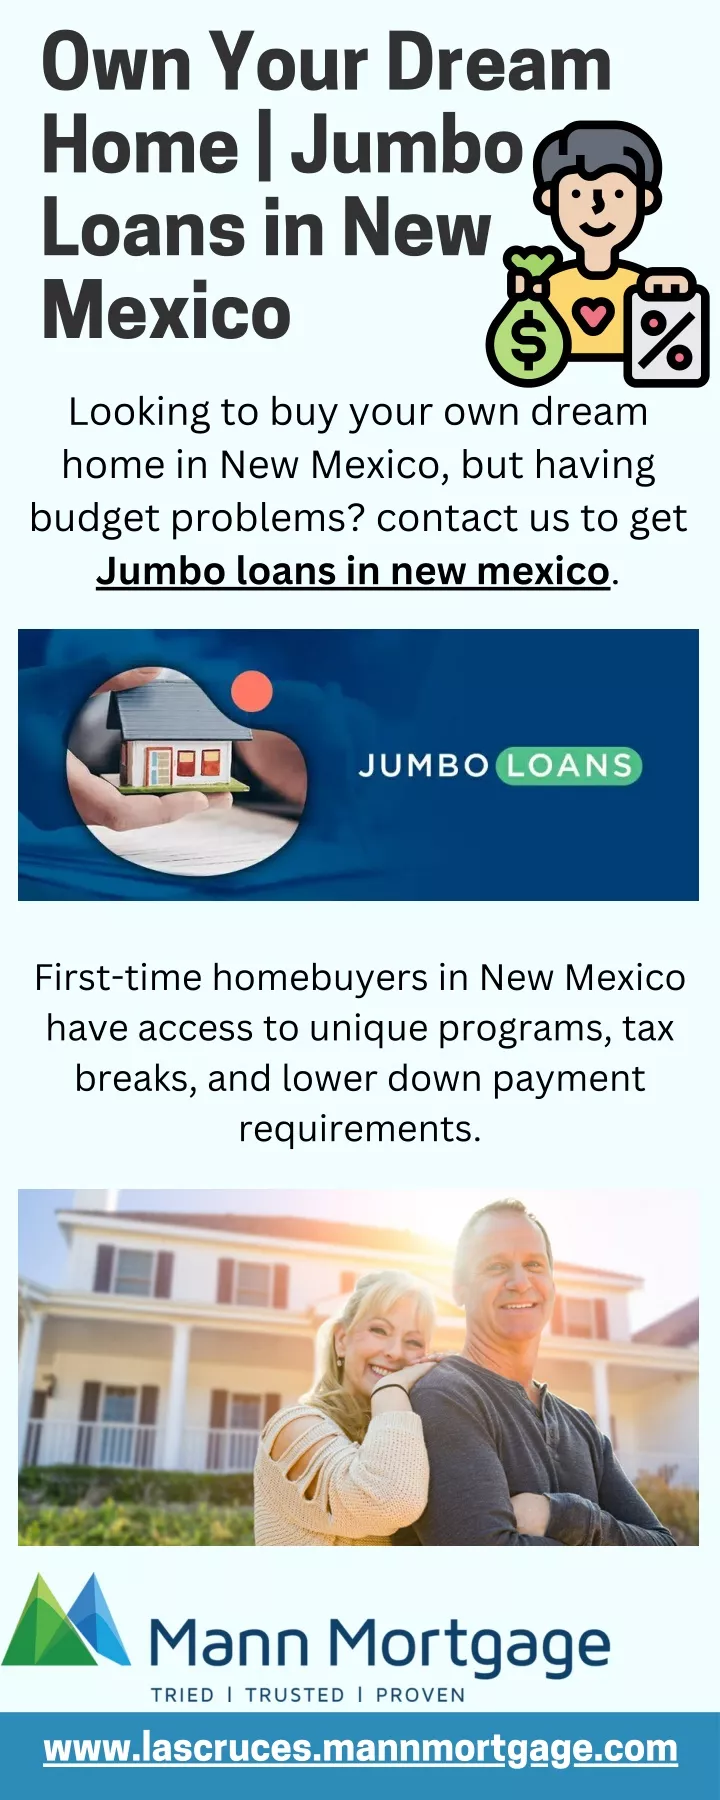 own your dream home jumbo loans in new mexico